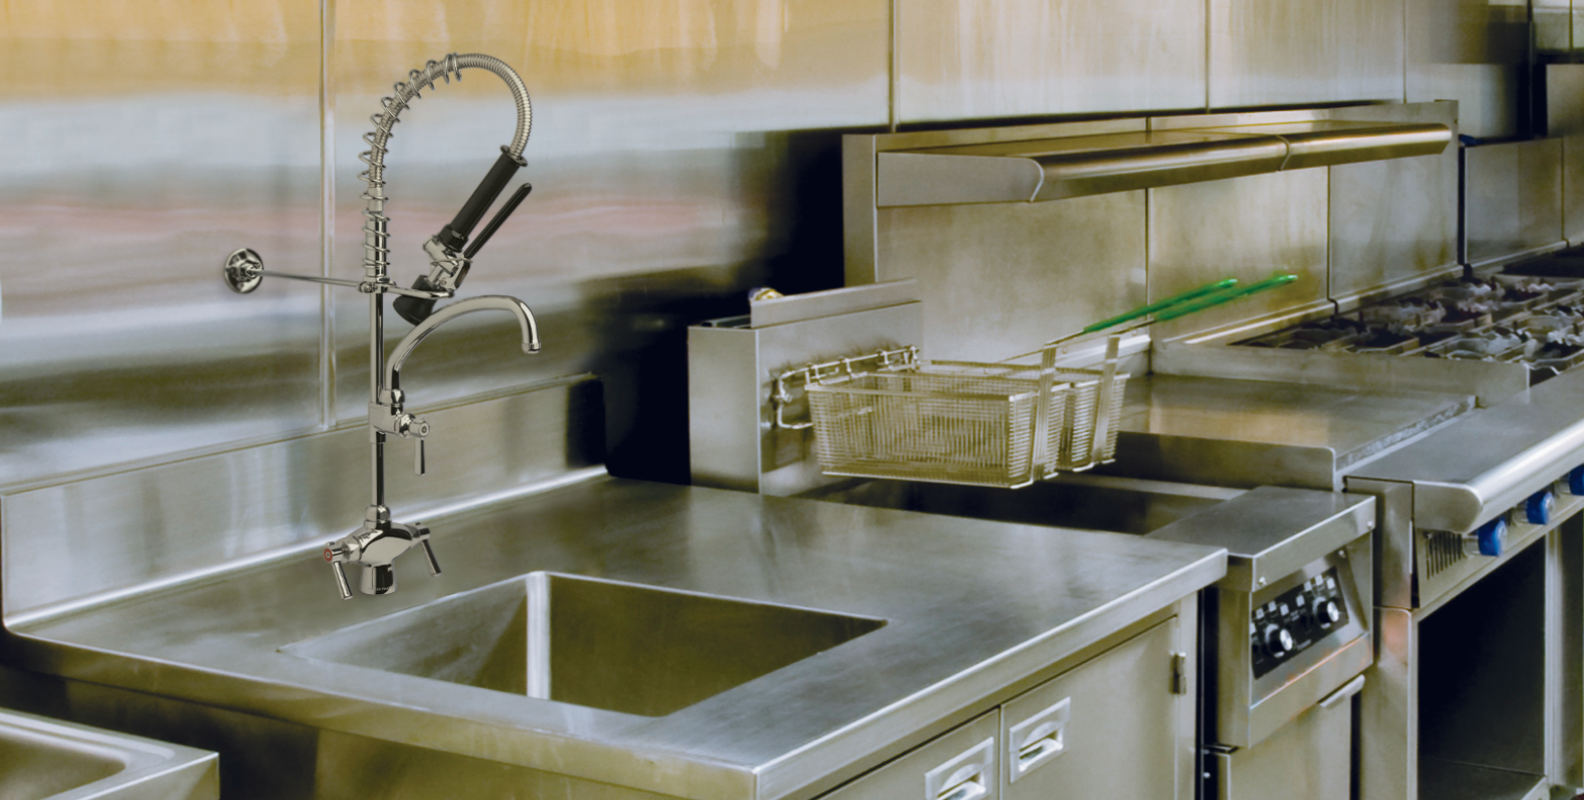 Dishwashing sink with commercial kitchen pre-rinse faucets